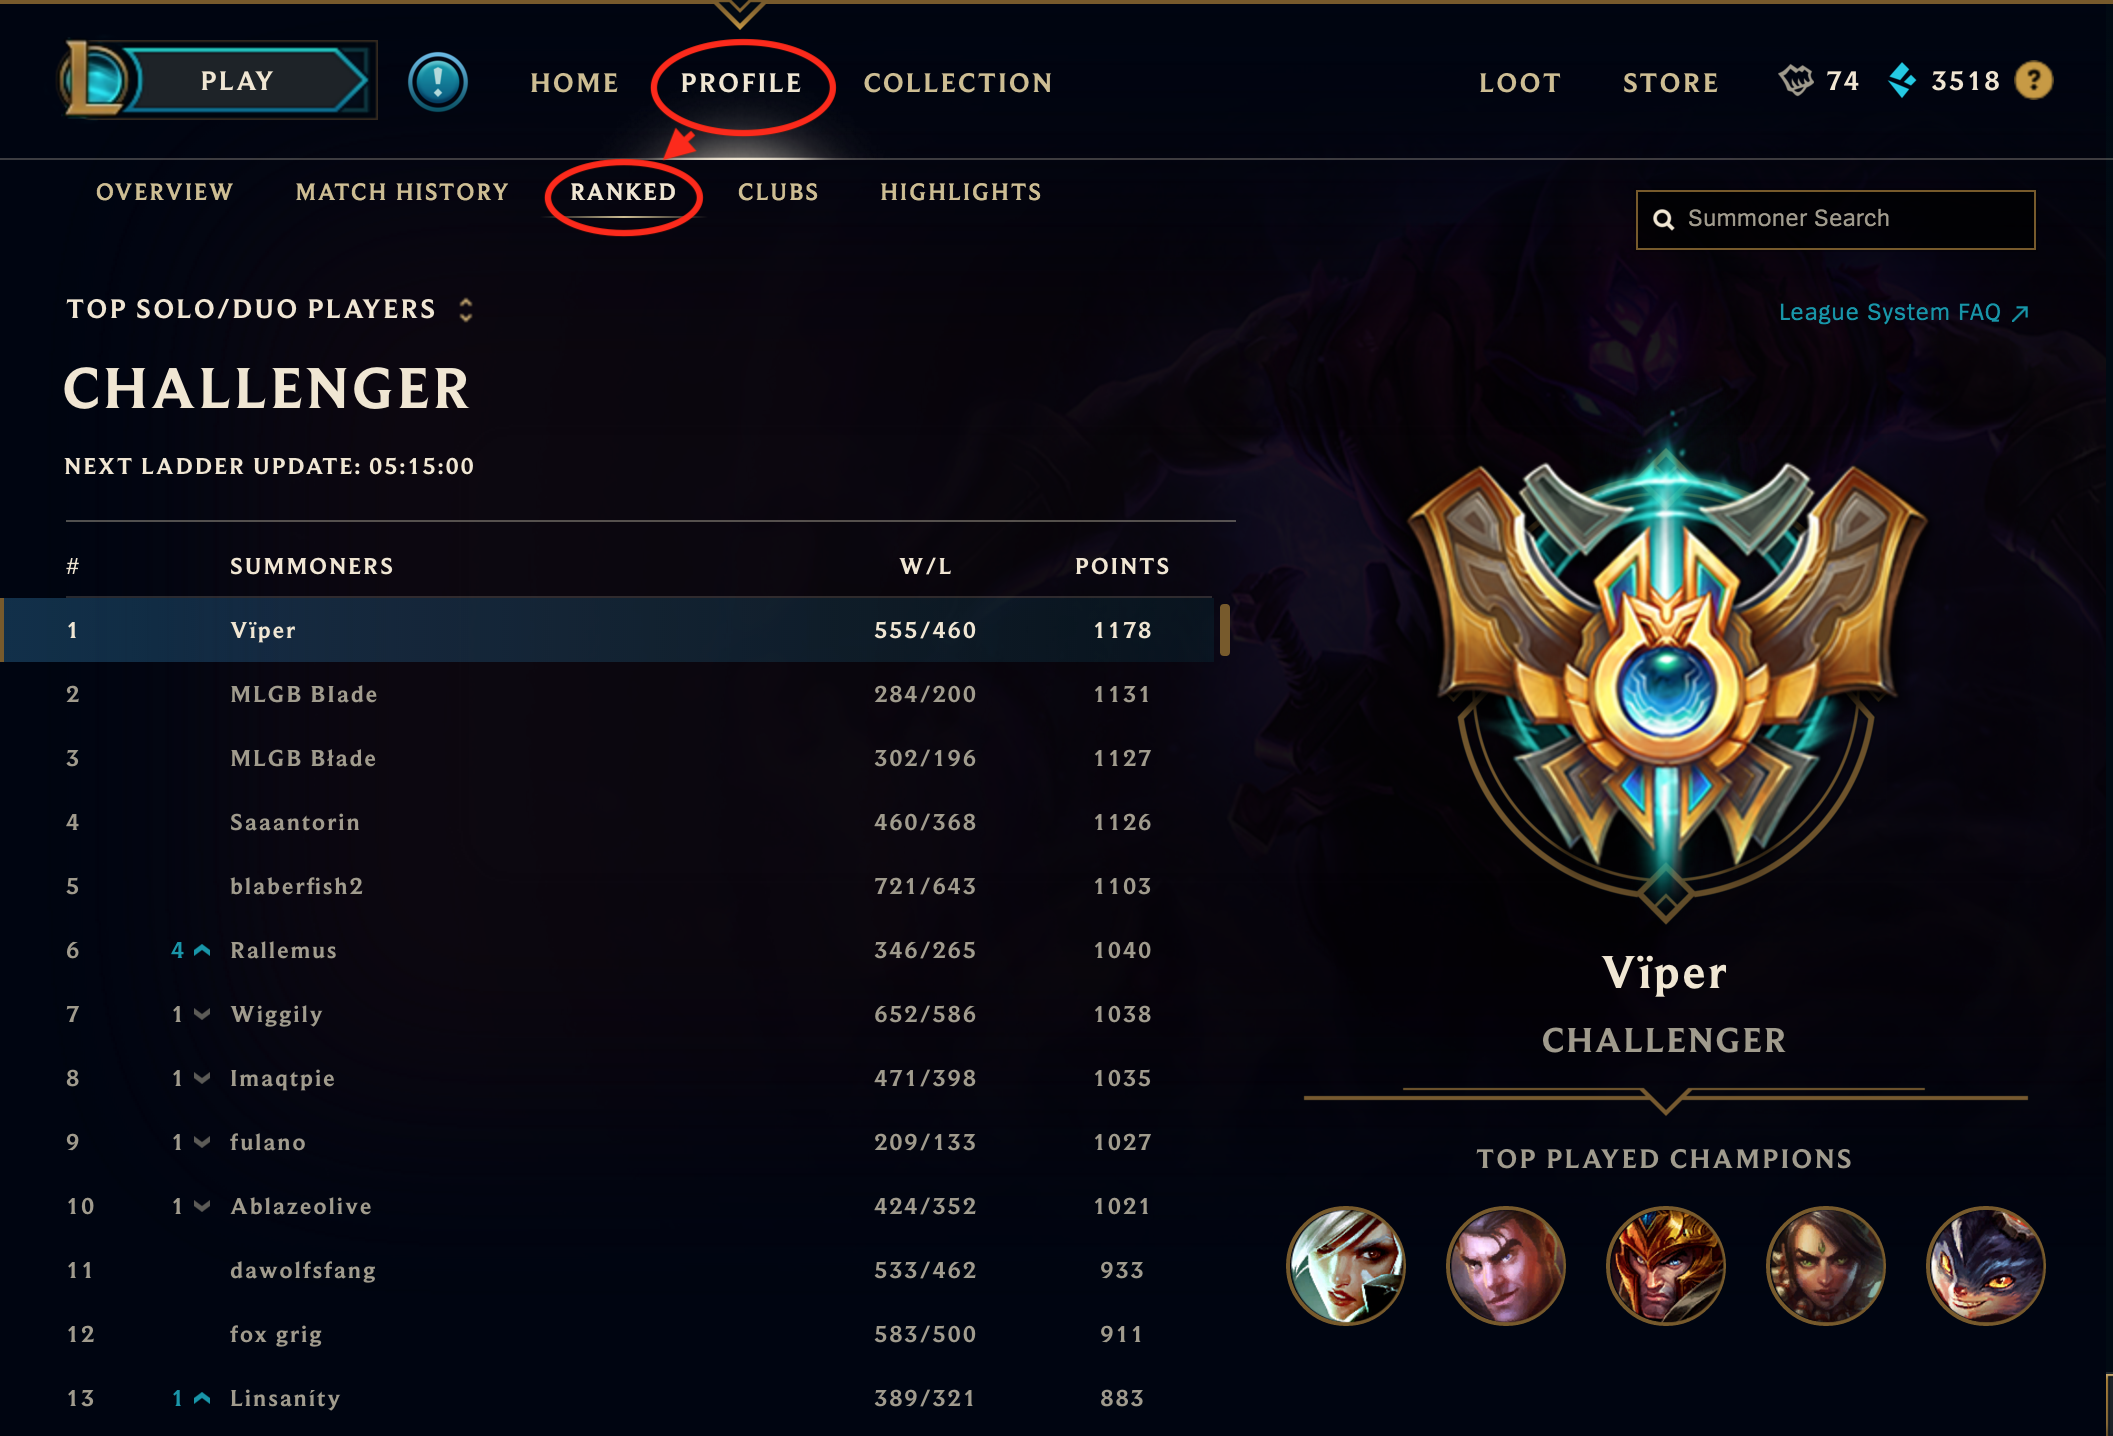 What's the biggest difference between High ELO and Low ELO players